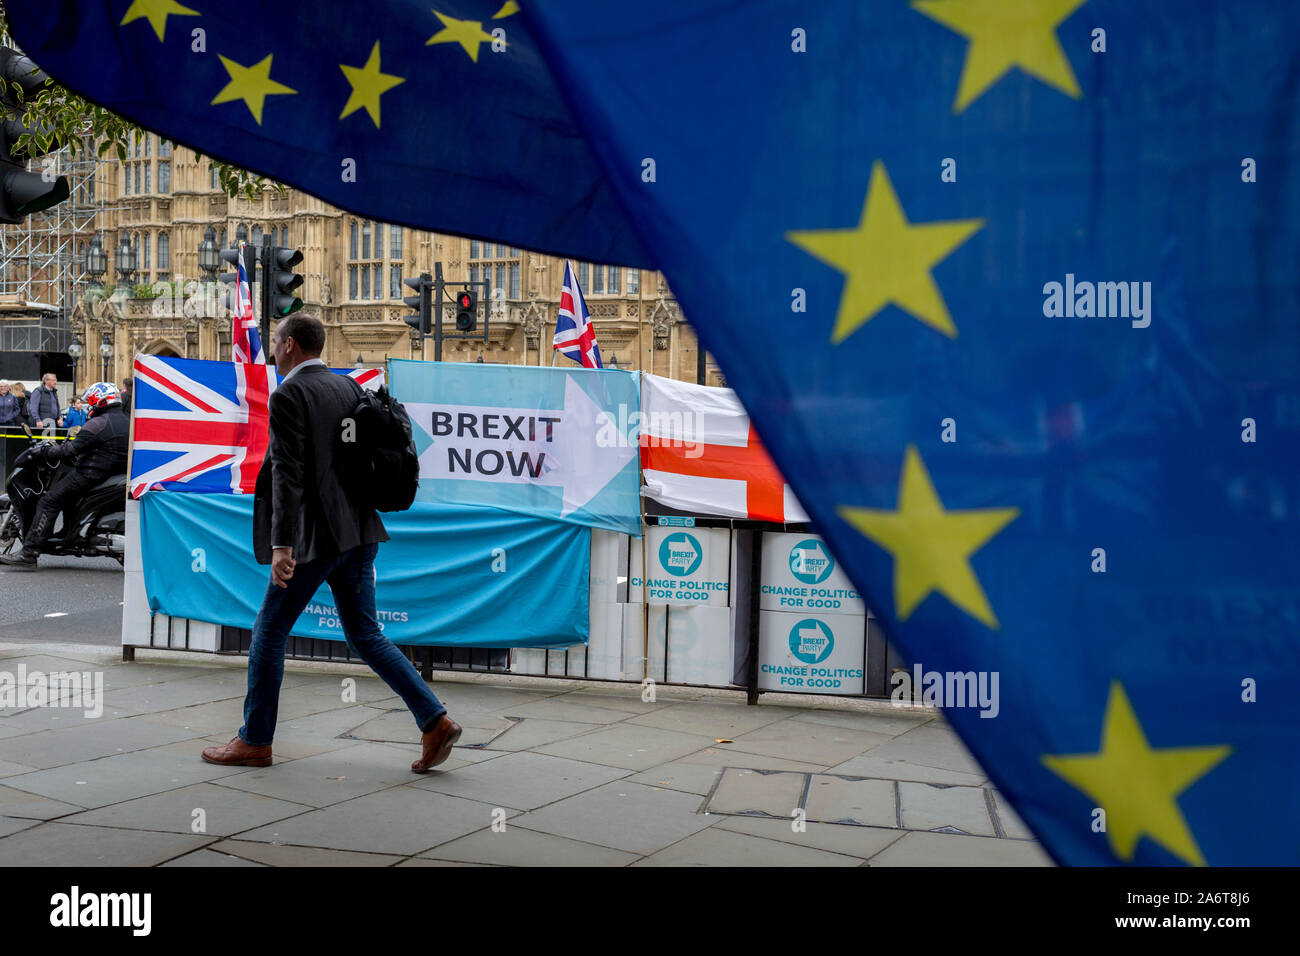 On the day that the EU in Brussels agreed in principle to extend Brexit until 31st January 2020 (aka 'Flextension') and not 31st October 2019, a pedestrian walks past Brexit Party flags and banners during a Brexit protest outside parliament, on 28th October 2019, in Westminster, London, England. Stock Photo